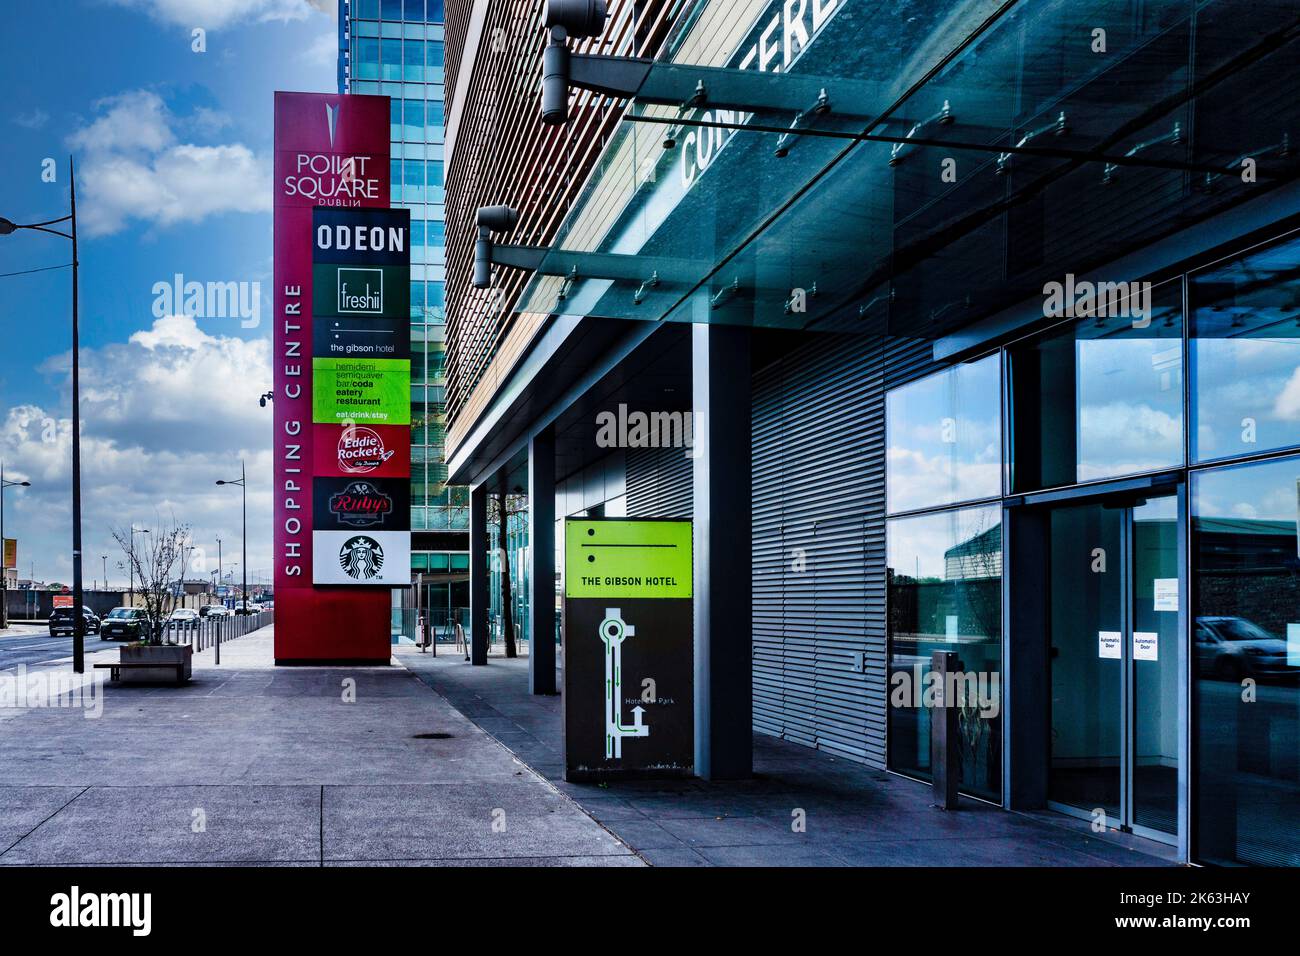 The Point Square Shopping Centre, East Wall, Dublin, Ireland. Stock Photo